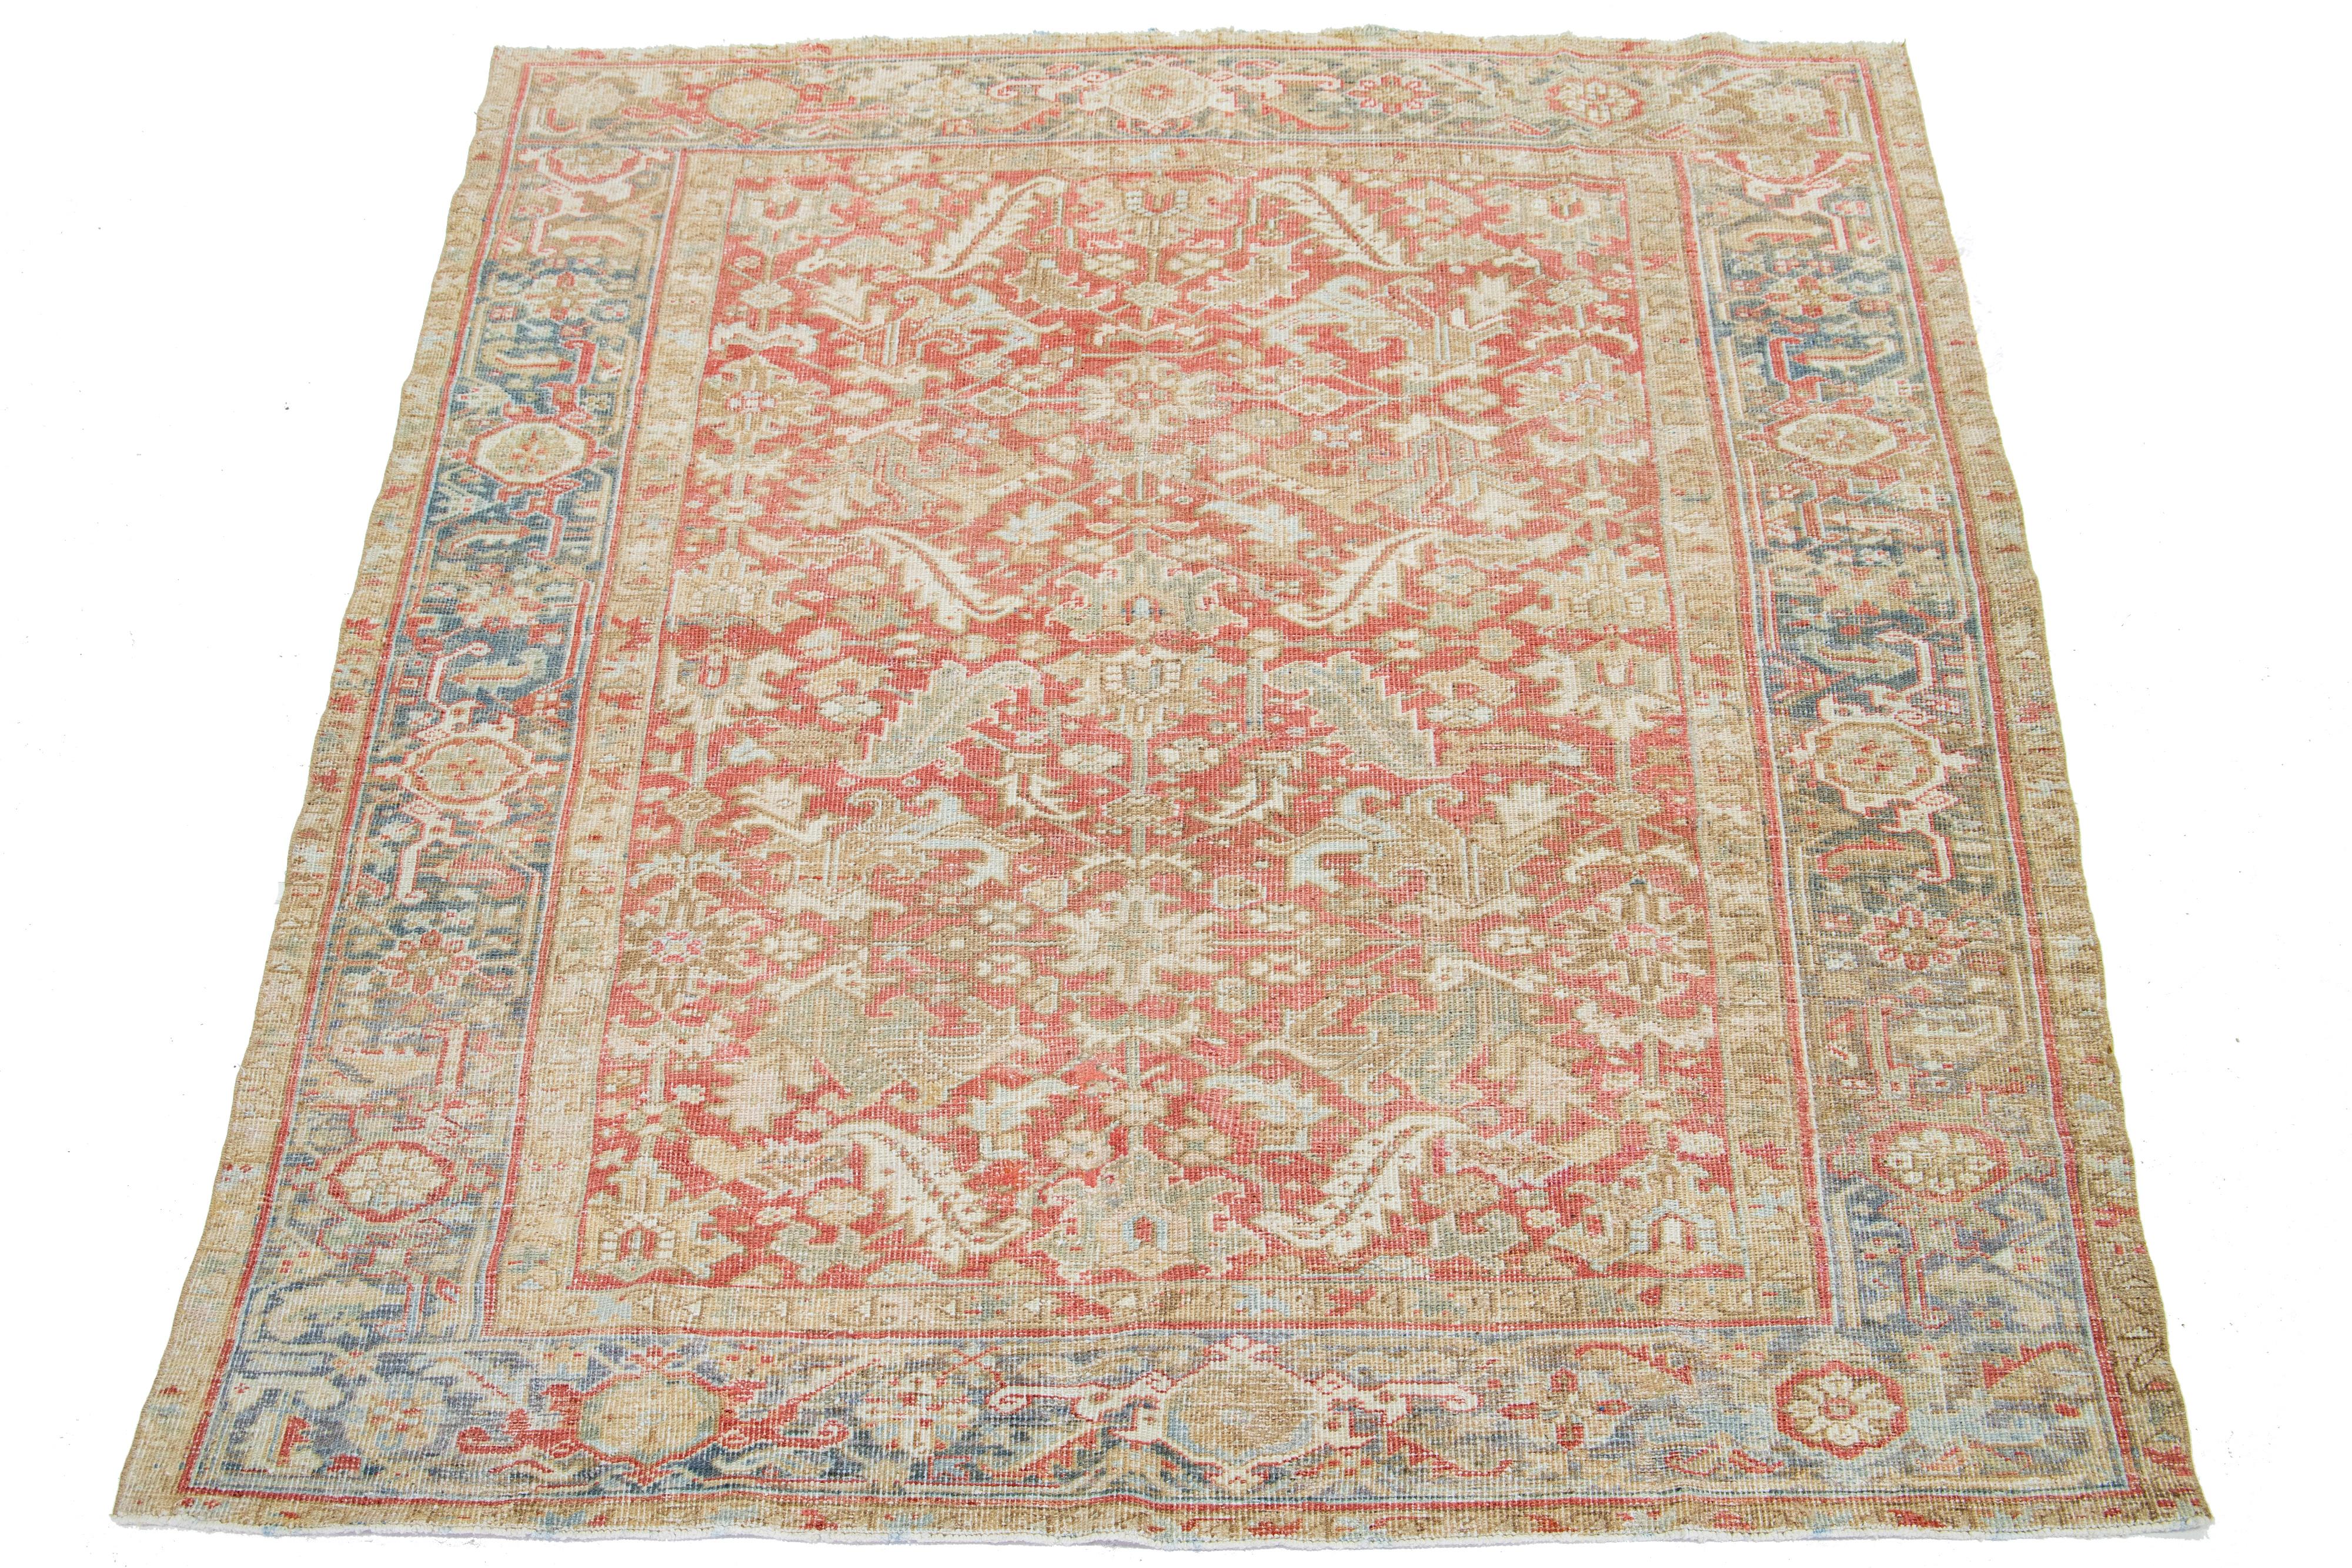 This antique Persian Heriz rug is crafted with hand-knotted wool. The rust-colored field features a captivating allover pattern embellished with shades of blue, beige, and brown.

This rug measures 7'1